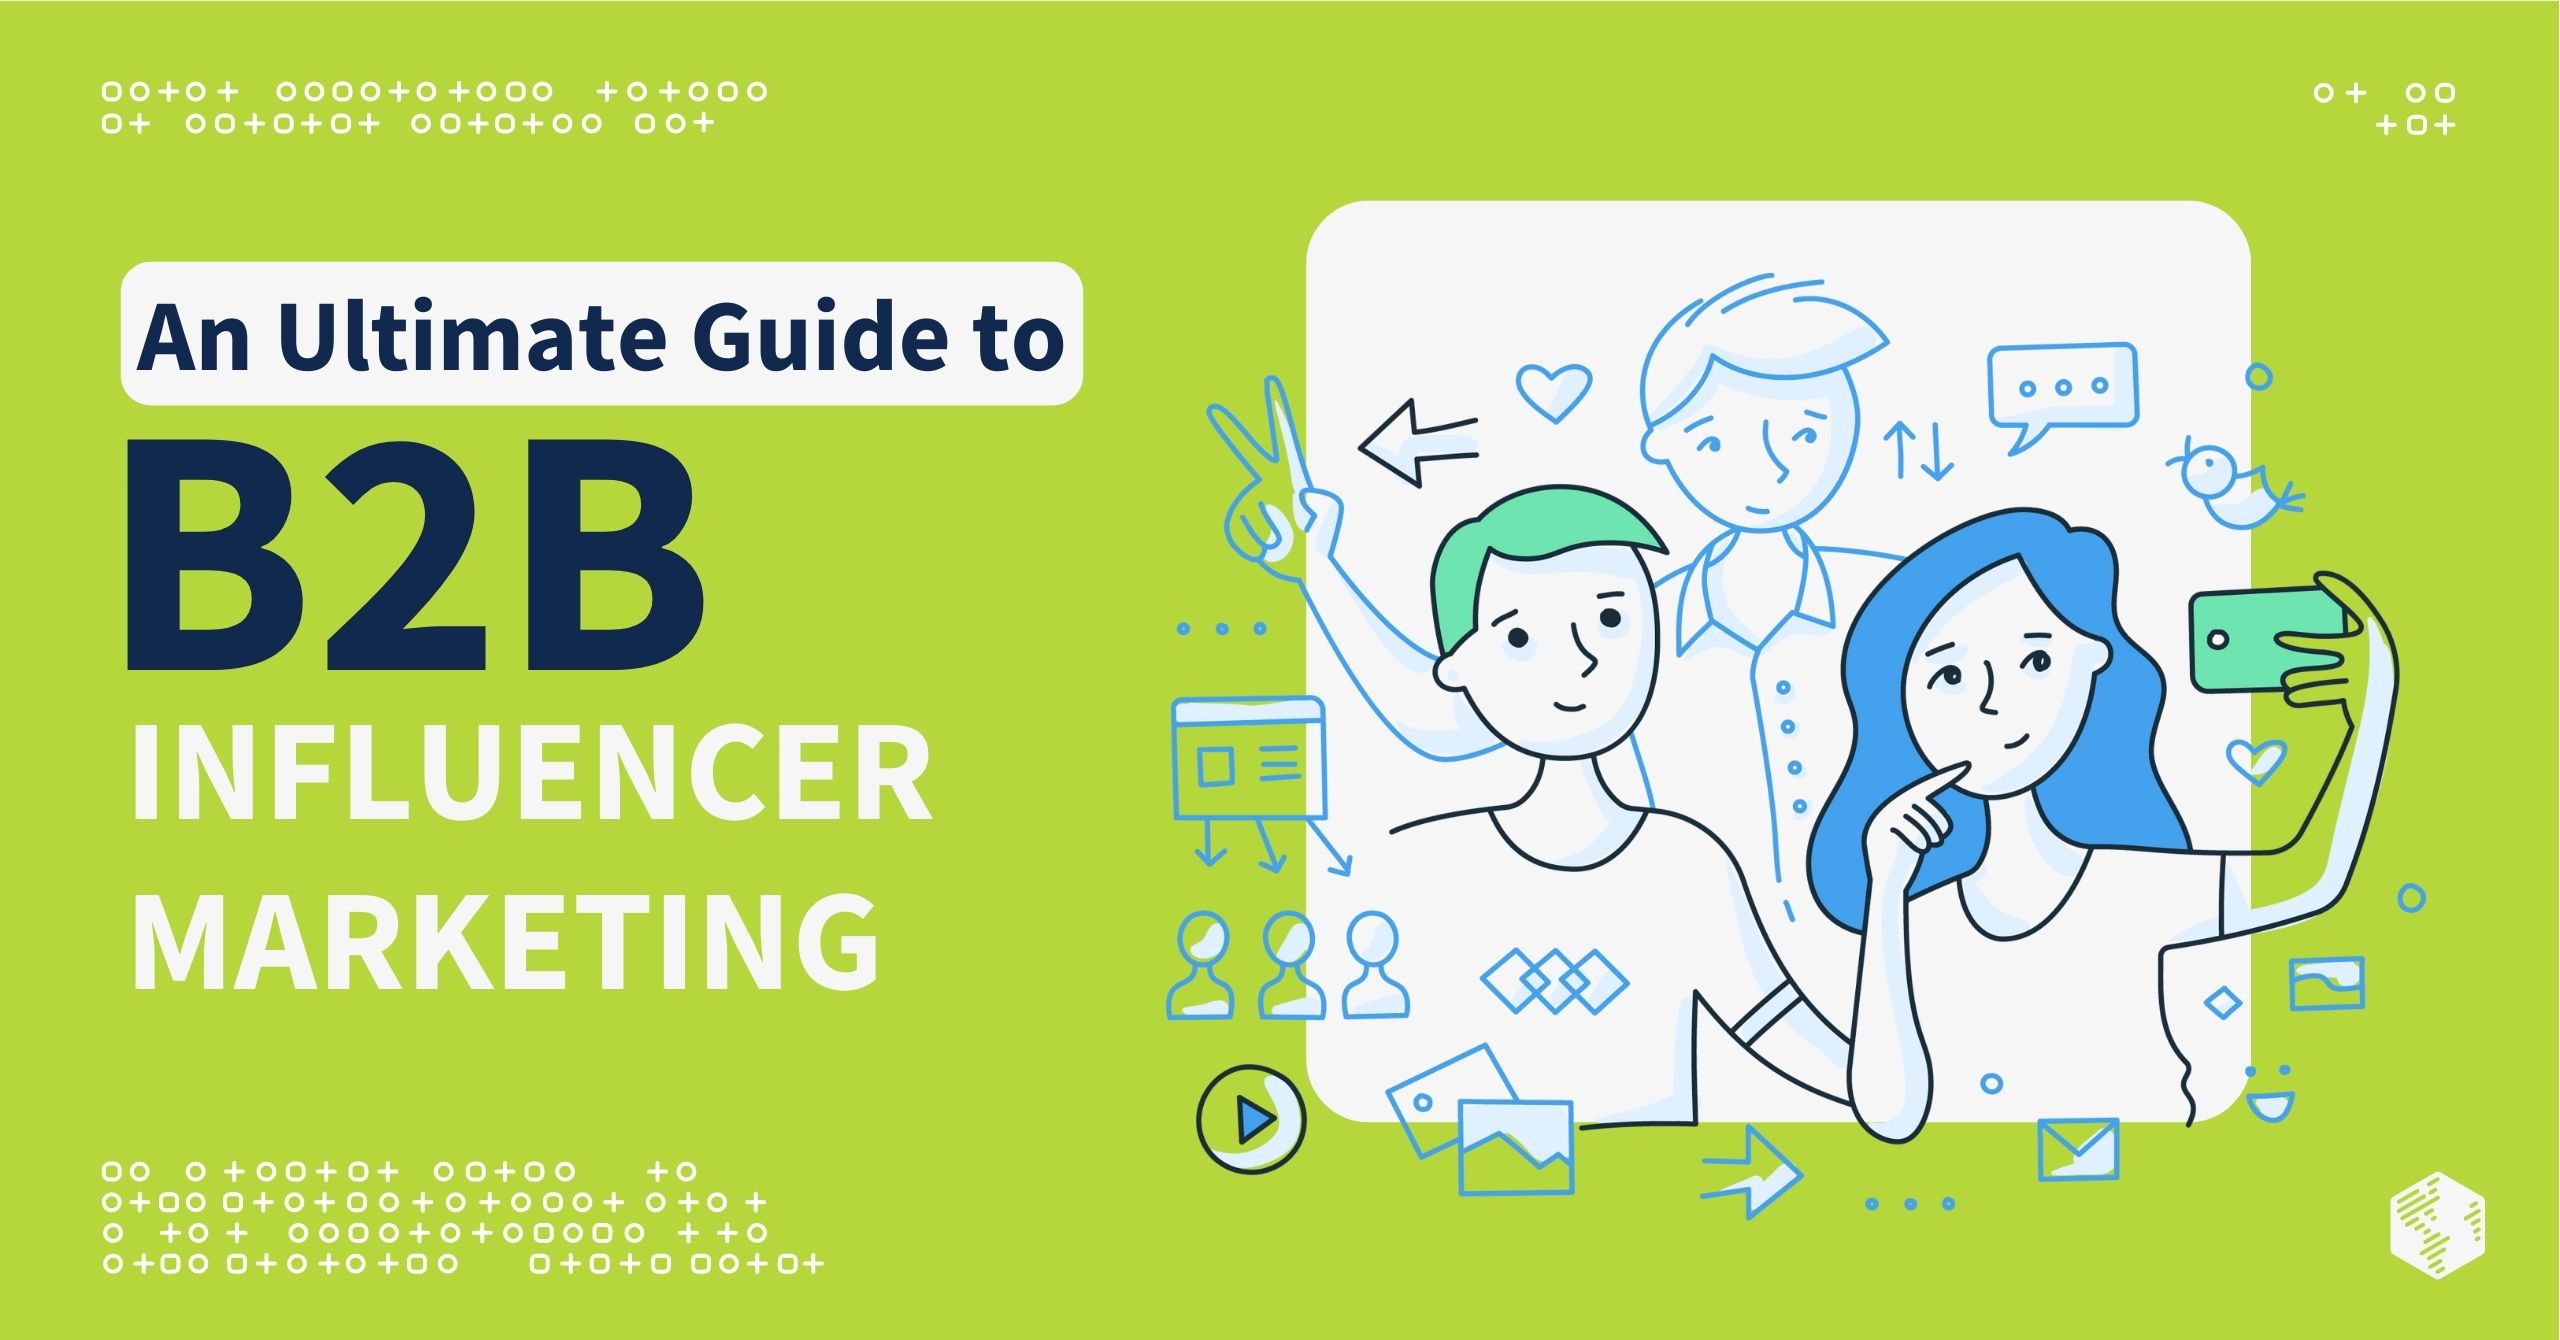 An Ultimate Guide to B2B Influencer Marketing